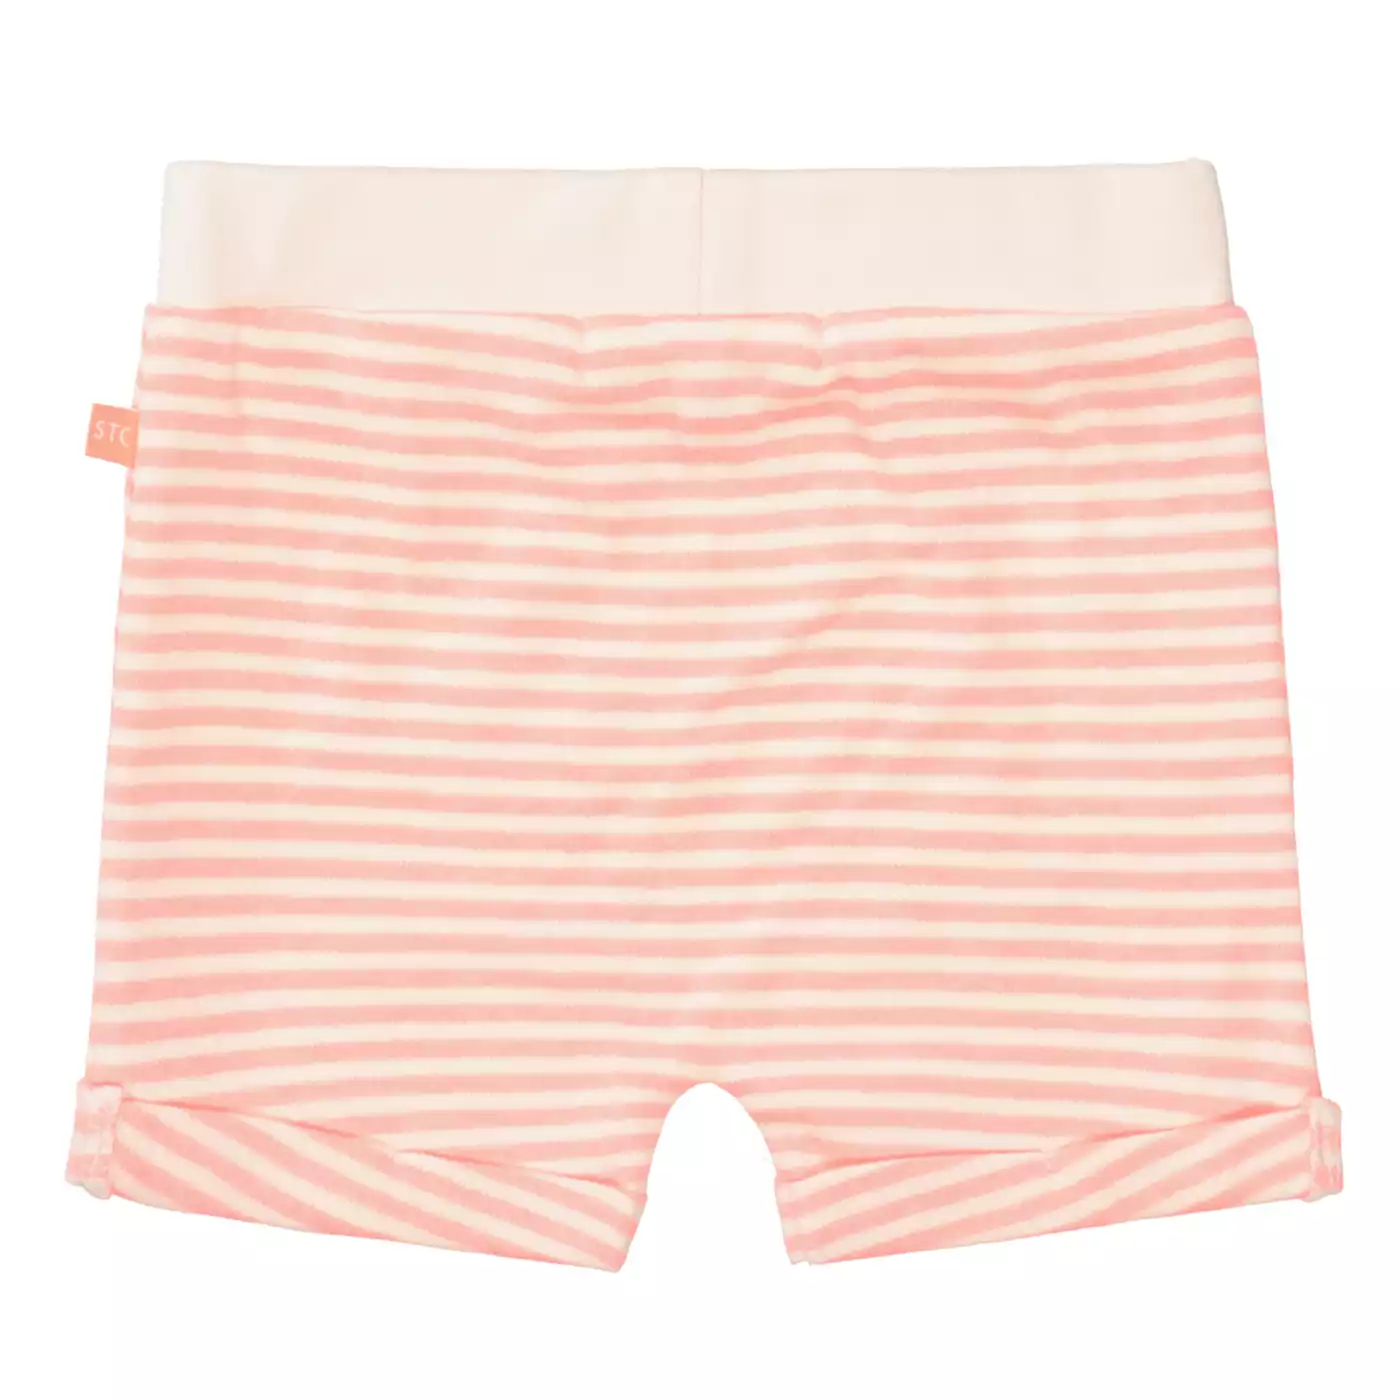 Shorts Neon Coral STACCATO Pink Rosa 2004580296103 4